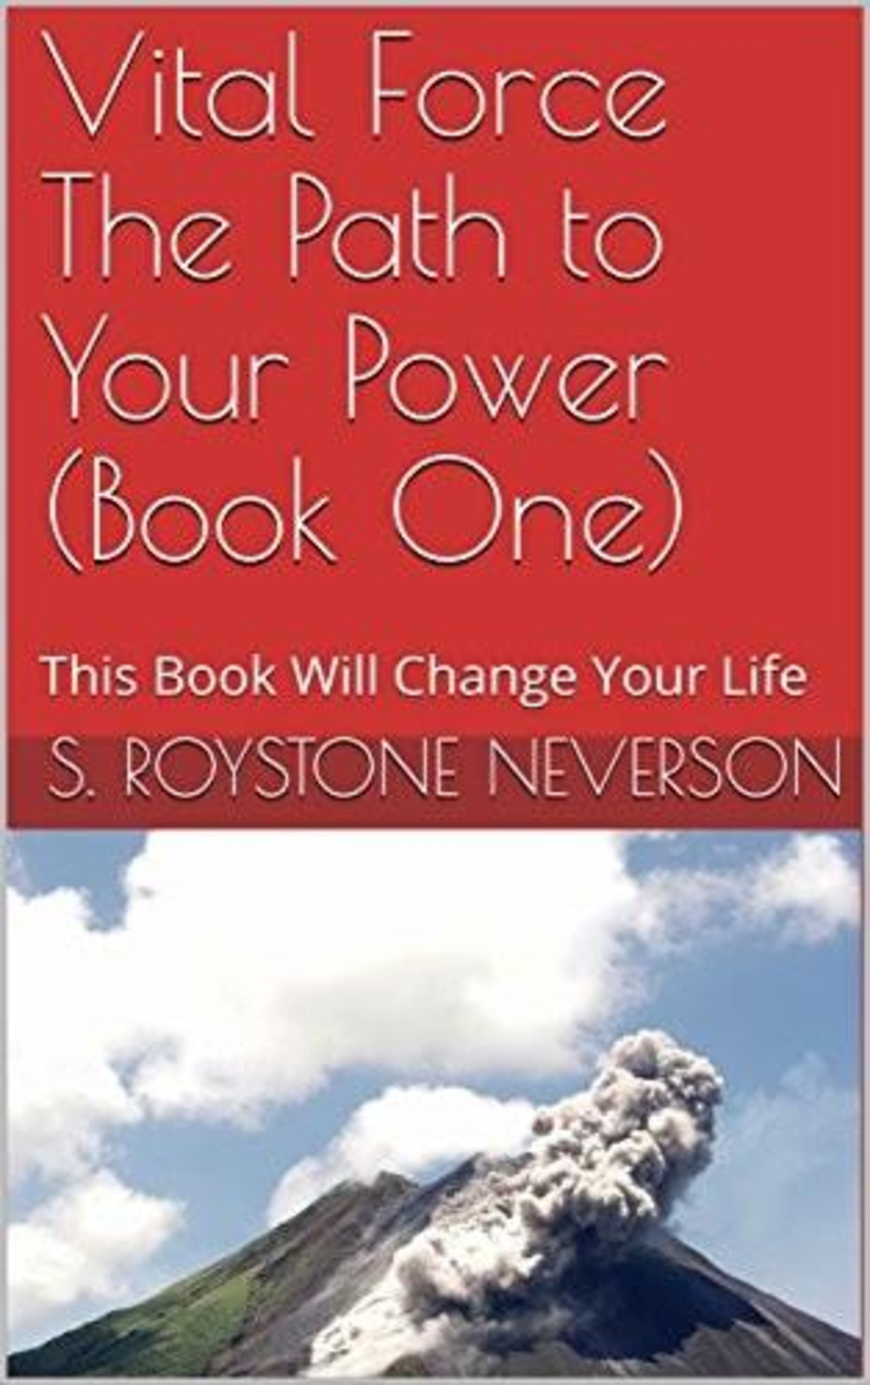 FREE: Vital Force the Path to Your Power (Book One) by S. Roystone Neverson